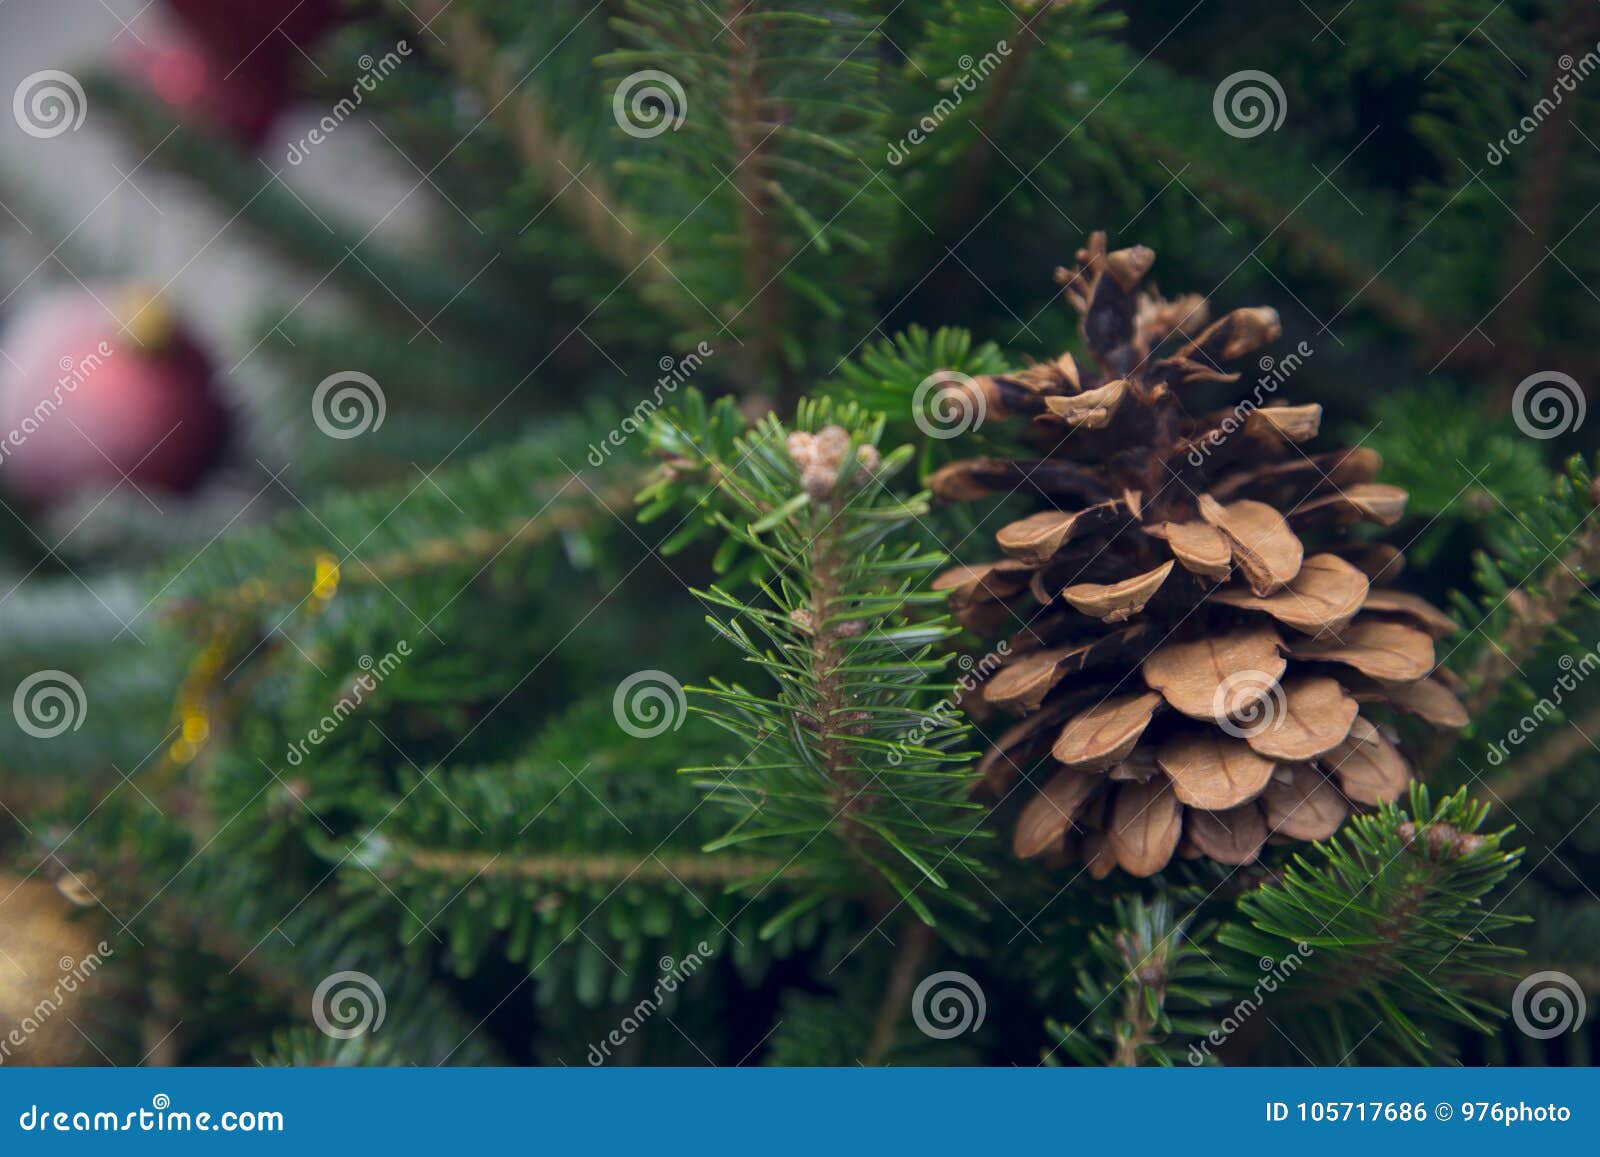 A pine cone on a fir tree stock photo. Image of date - 105717686